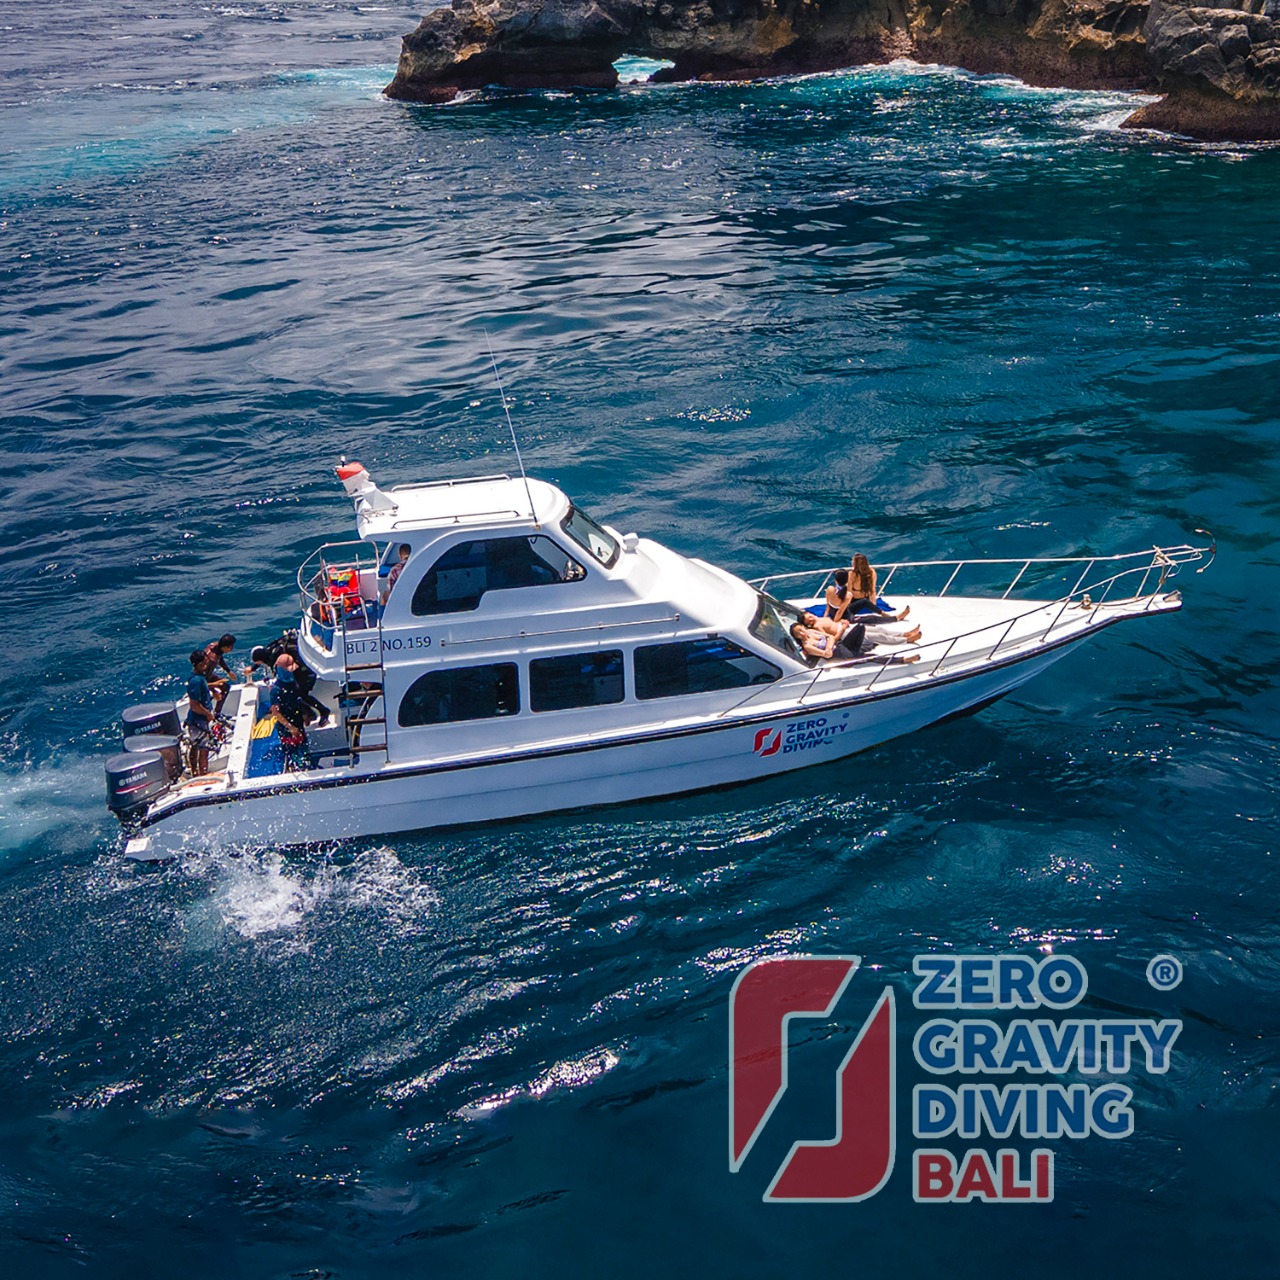 Private Boat Charter for Scuba Diving